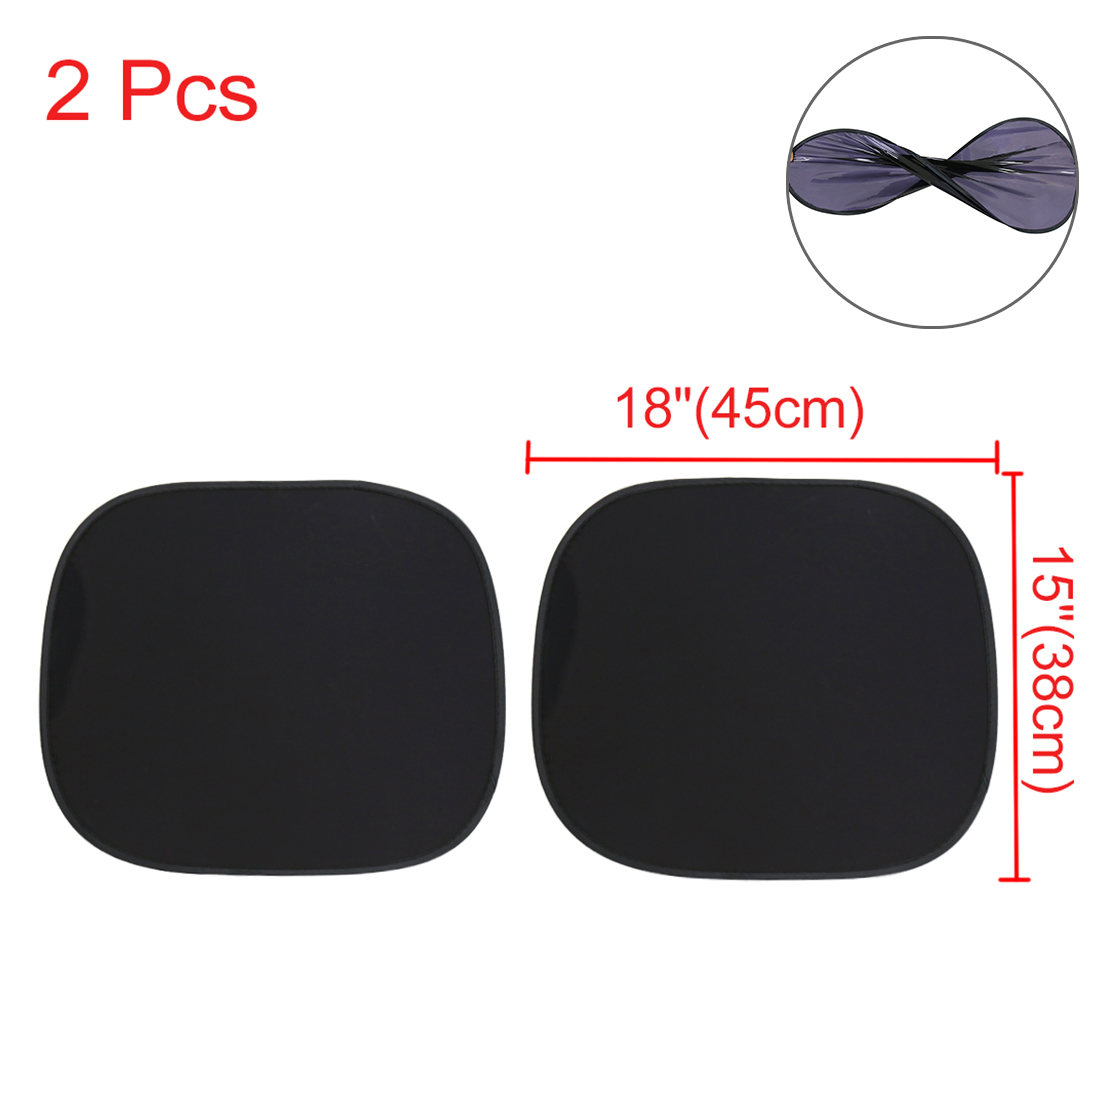 Unique Bargains 2 Pack Auto Sunshade Rectangular Static Electric Babycare Car Cling Sun Shade for Blocks 97% of UV Rays